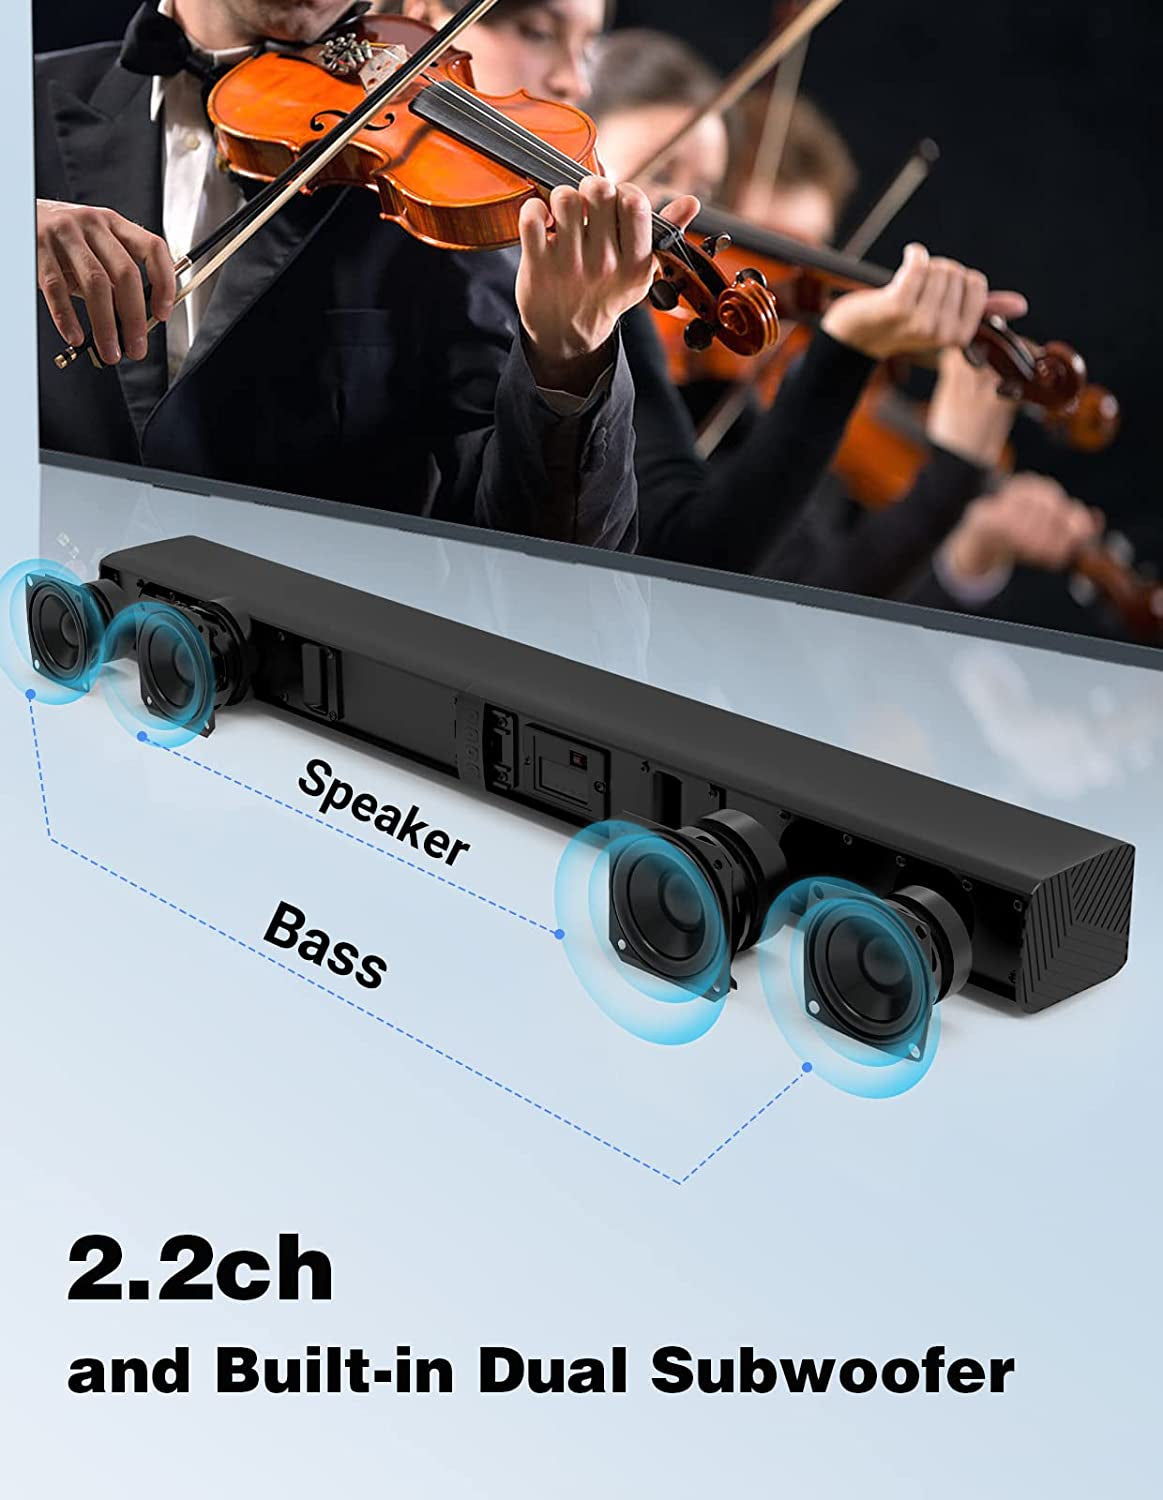 "32-Inch Bluetooth 5.0 TV Speaker: 2-in-1 Separable Sound Bars with Surround Sound System, Dual Subwoofer, Adjustable Bass, and Included Remote Control"